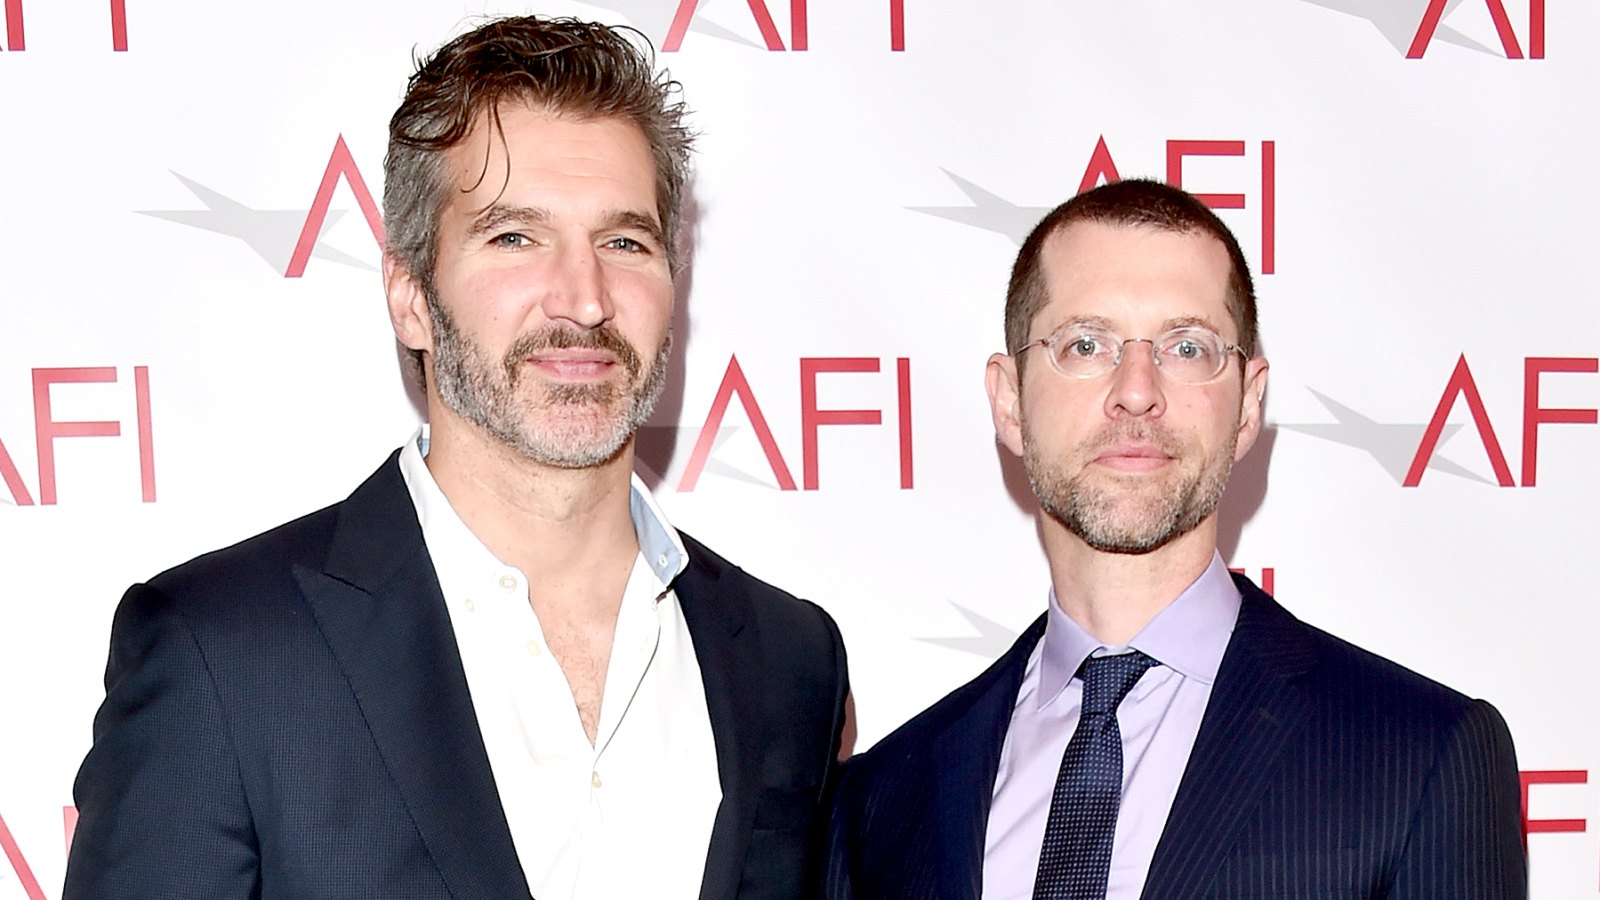 David Benioff and D. B. Weiss attend the 17th annual AFI Awards at Four Seasons Los Angeles at Beverly Hills on January 6, 2017 in Los Angeles, California.